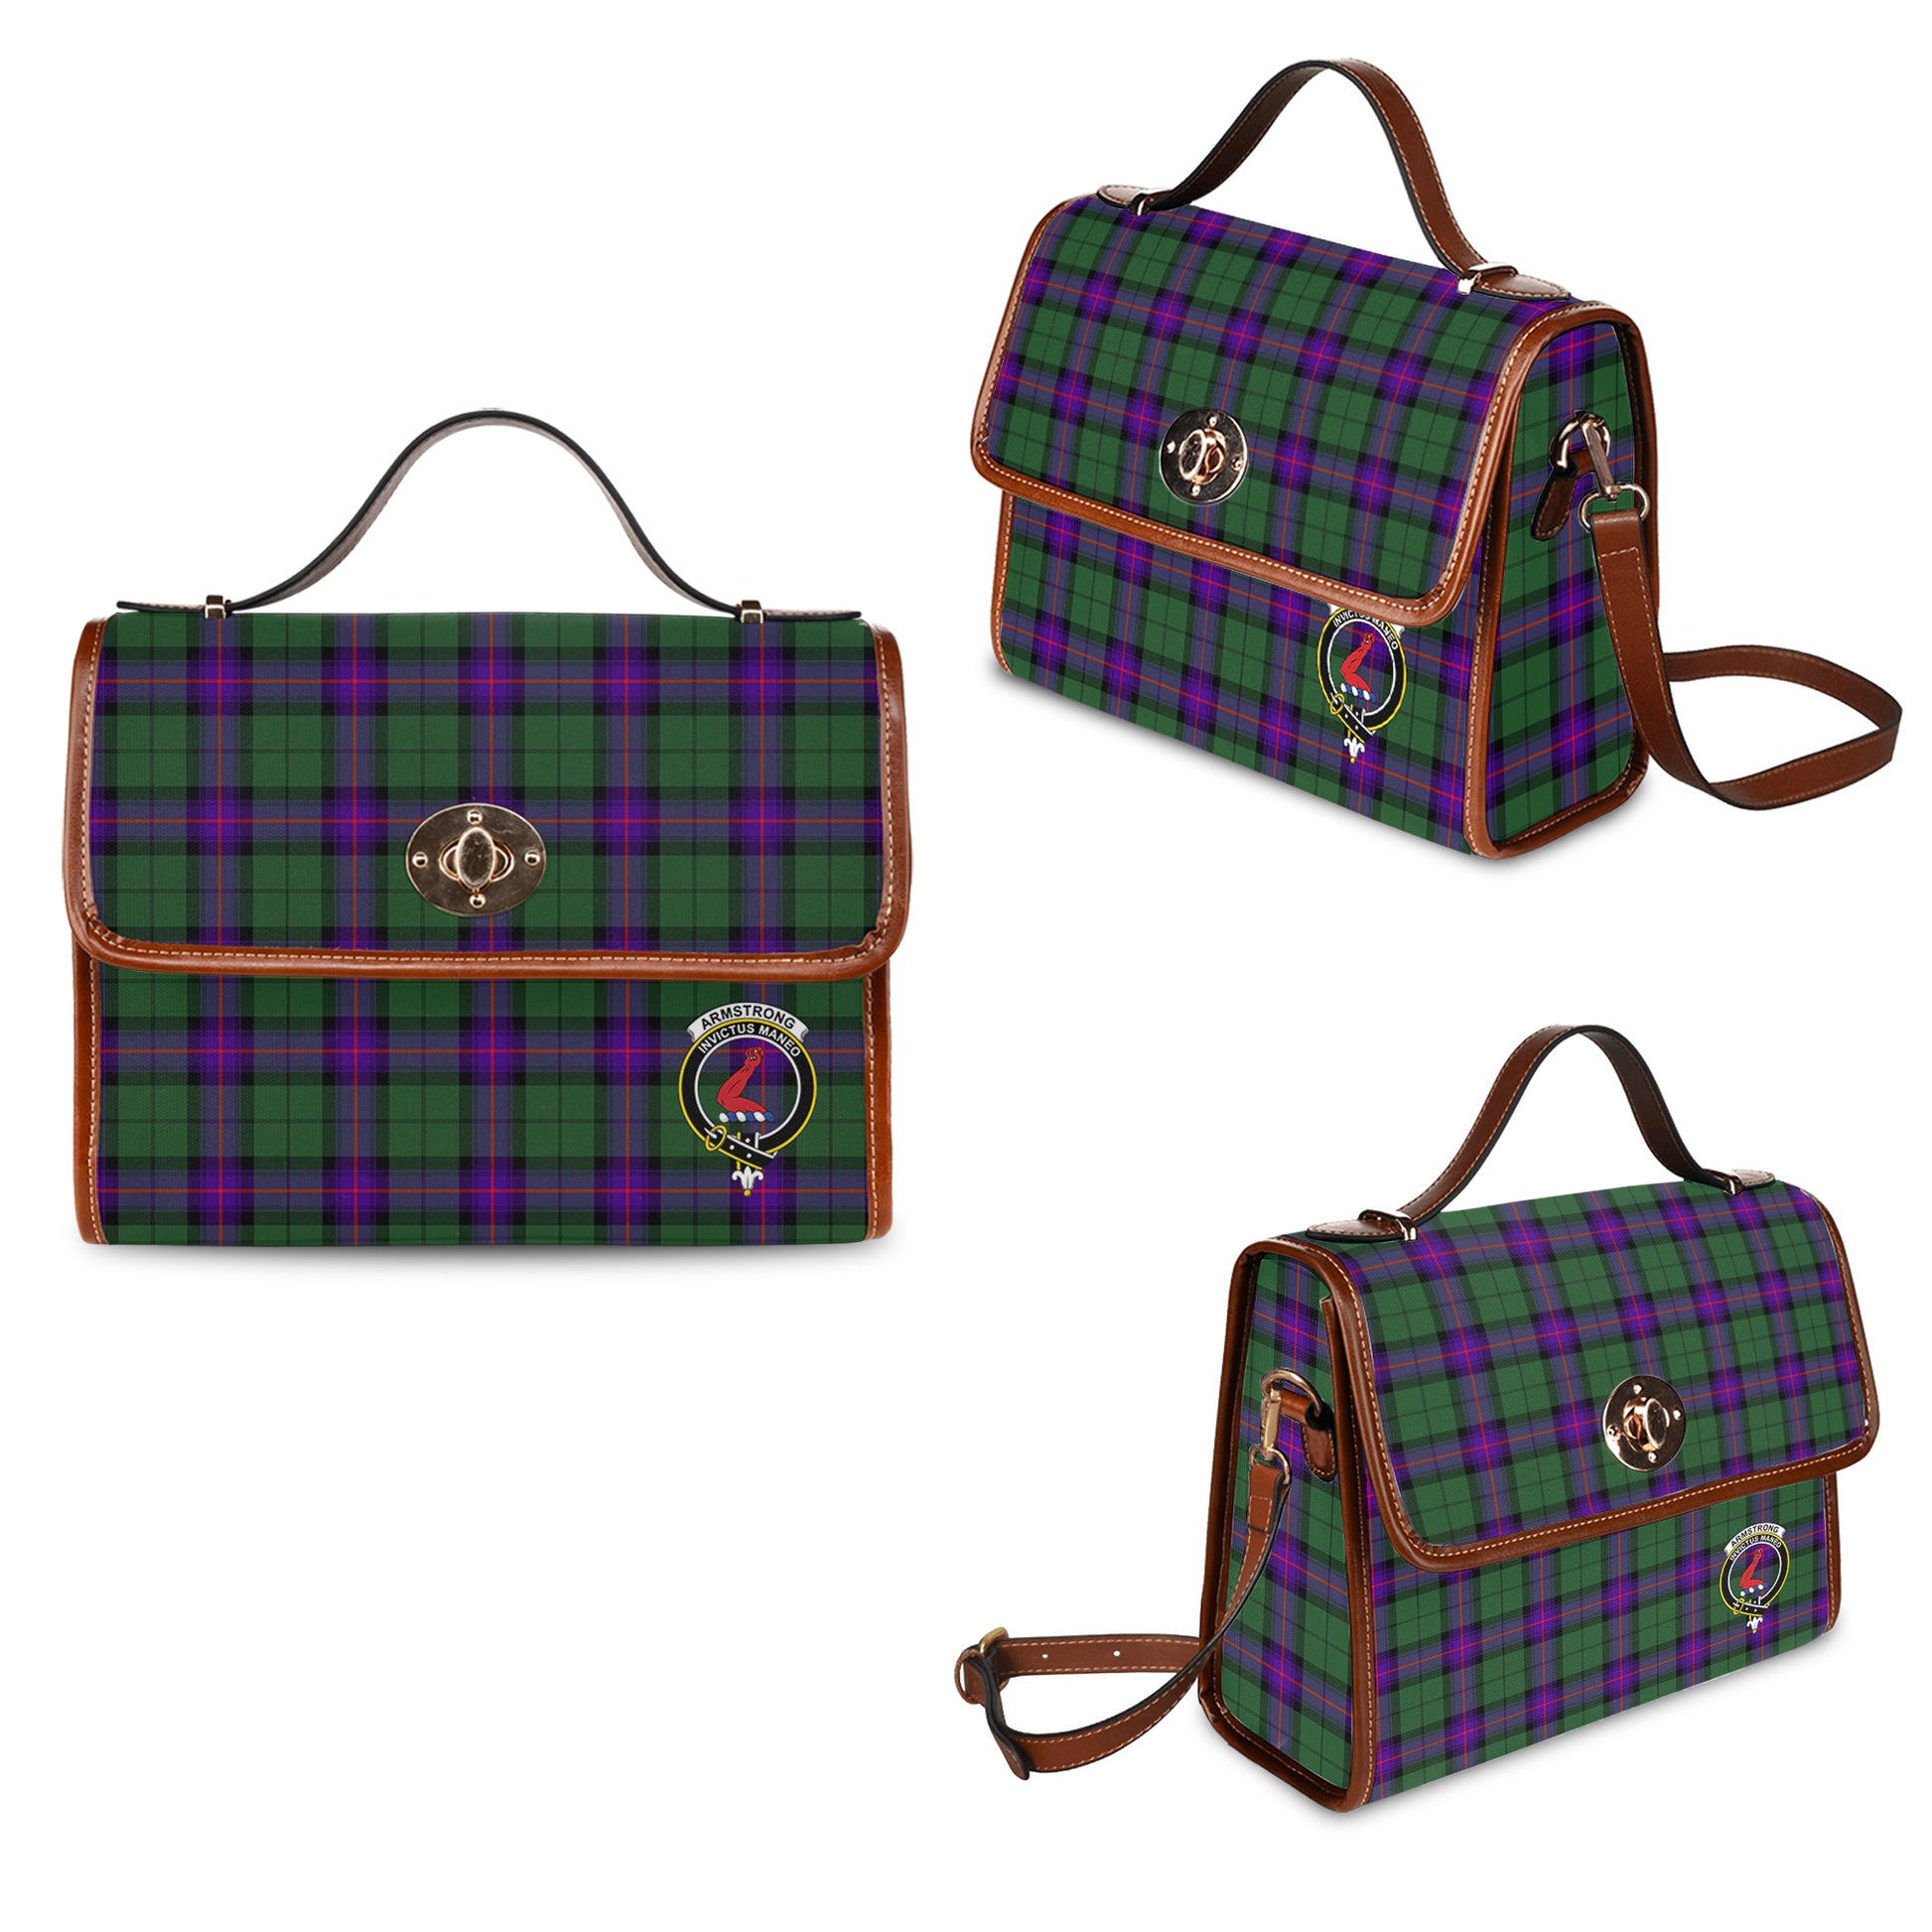 Armstrong Modern Tartan Leather Strap Waterproof Canvas Bag with Family Crest One Size 34cm * 42cm (13.4" x 16.5") - Tartanvibesclothing